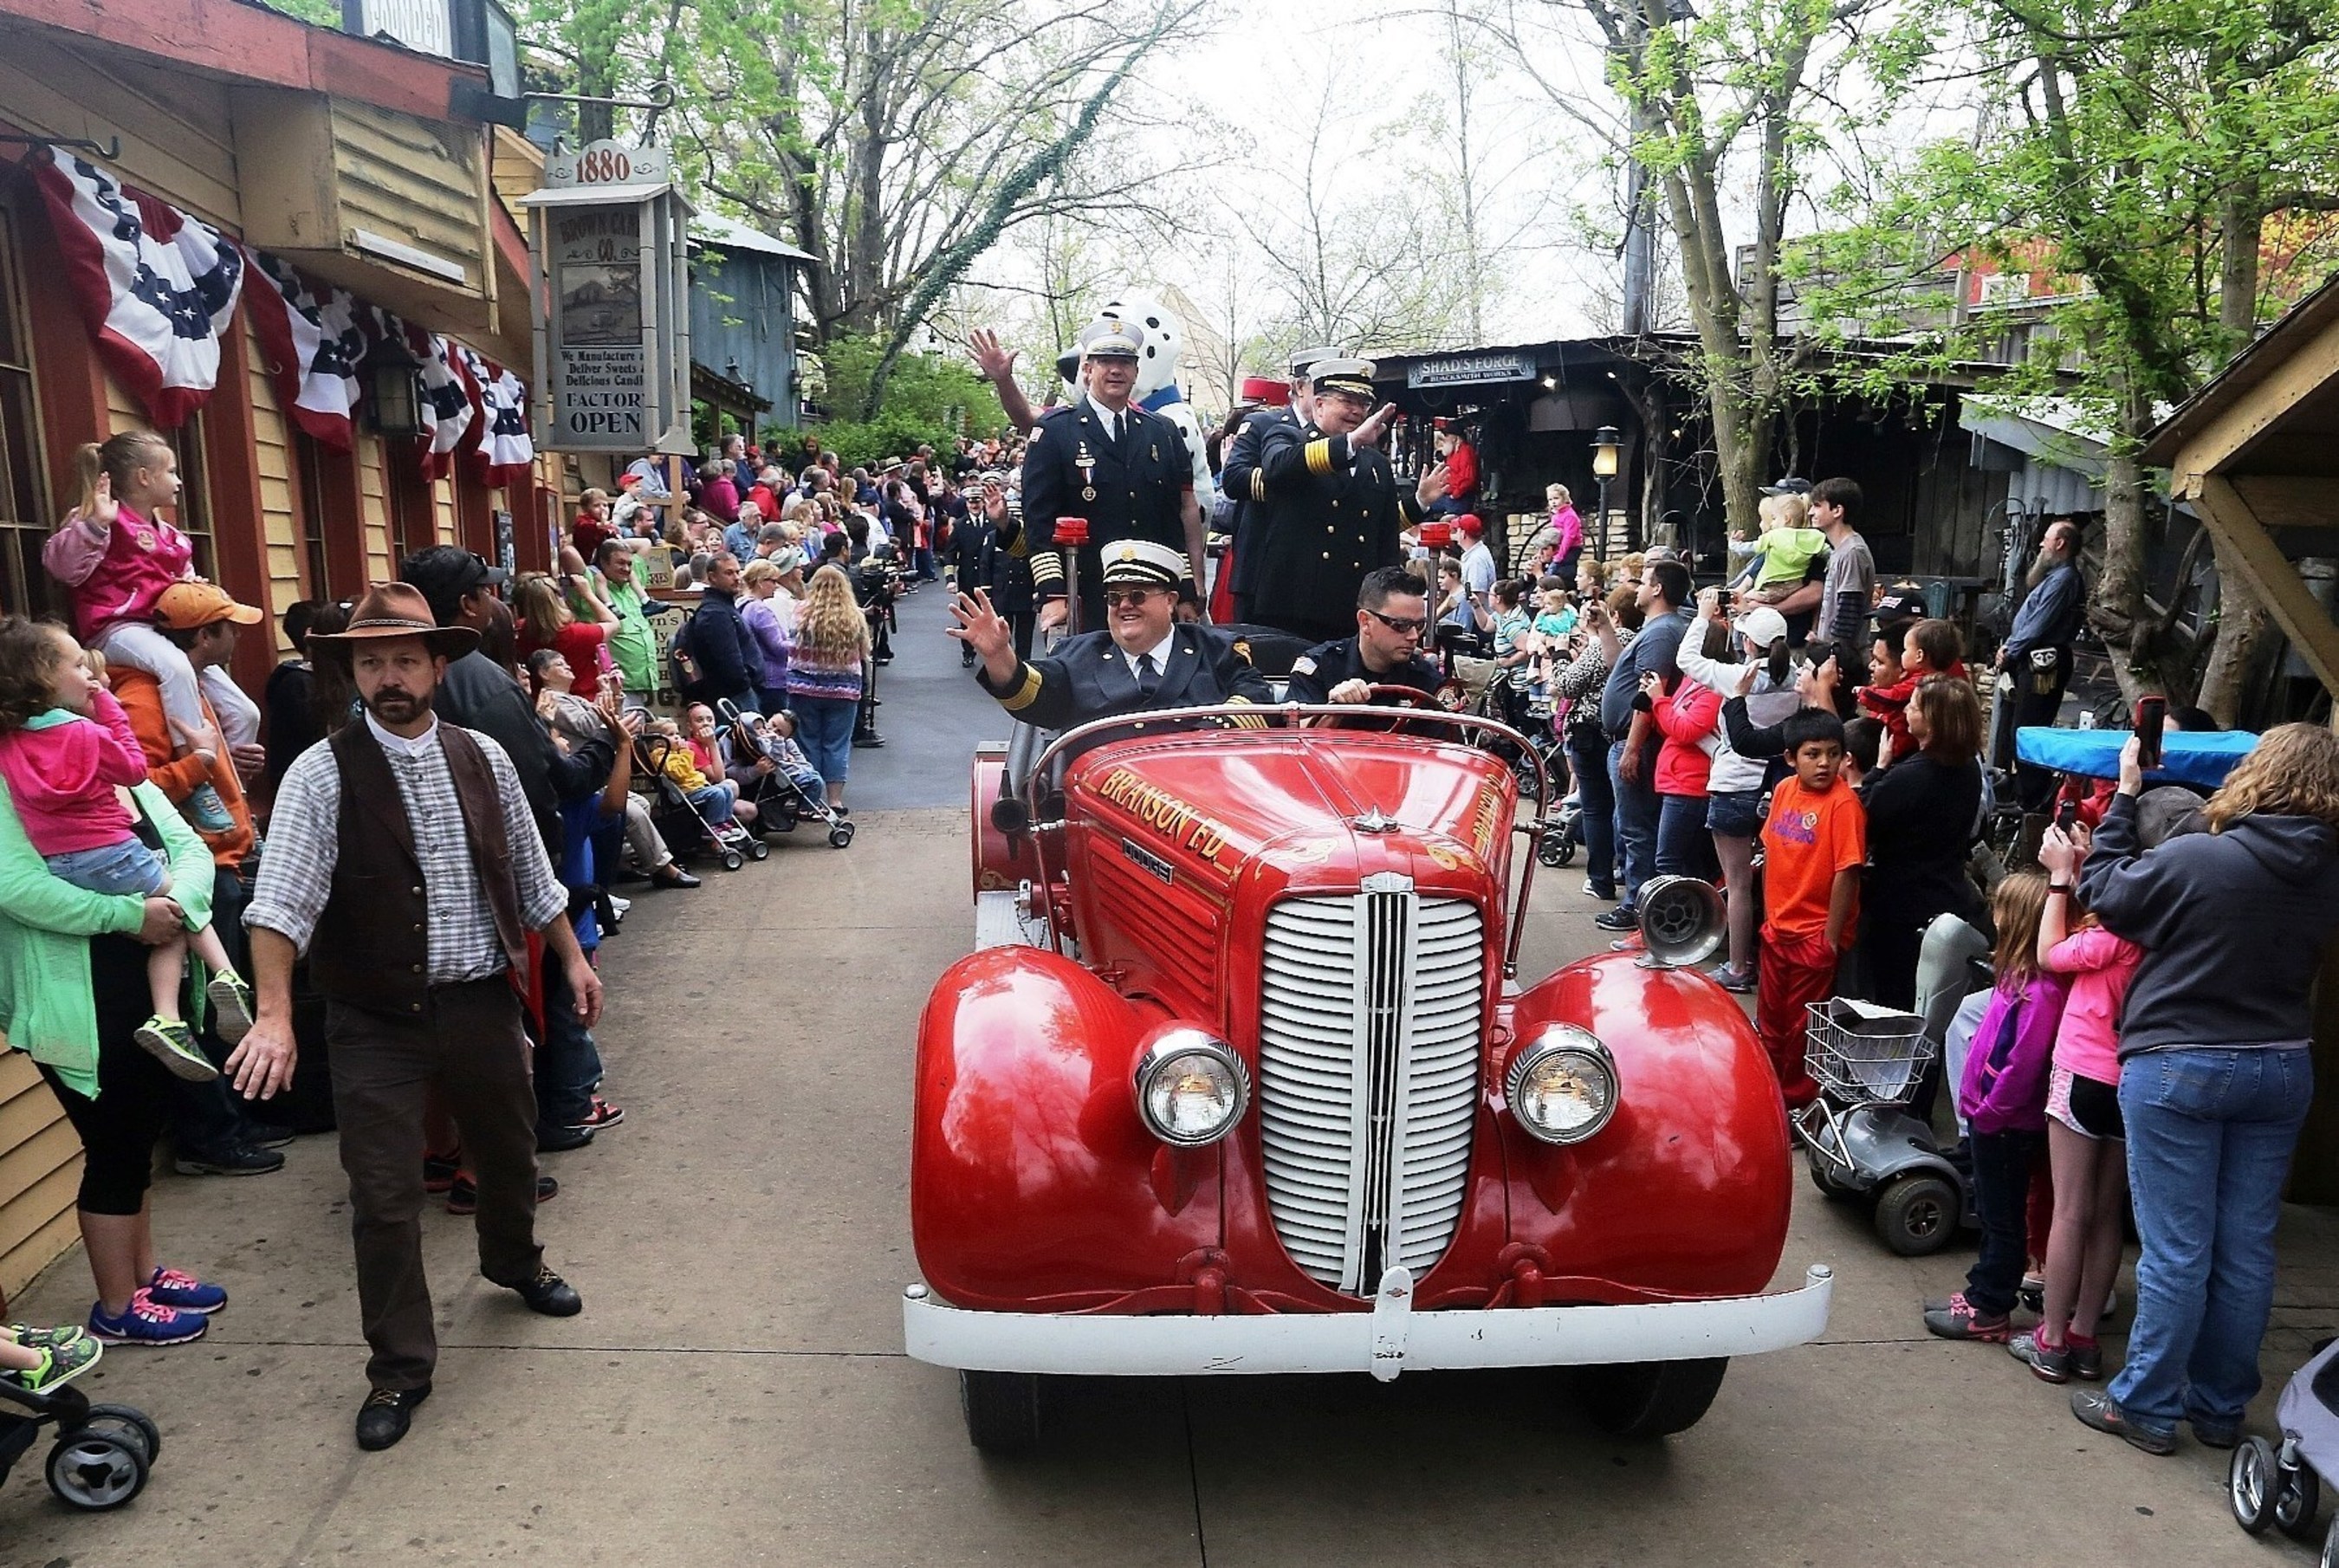 Uniformed firefighters led a parade through the streets of Silver Dollar City to Fireman's Landing, the theme park's new area with 10 family adventures, themed as a volunteer firefighter recruitment fair.